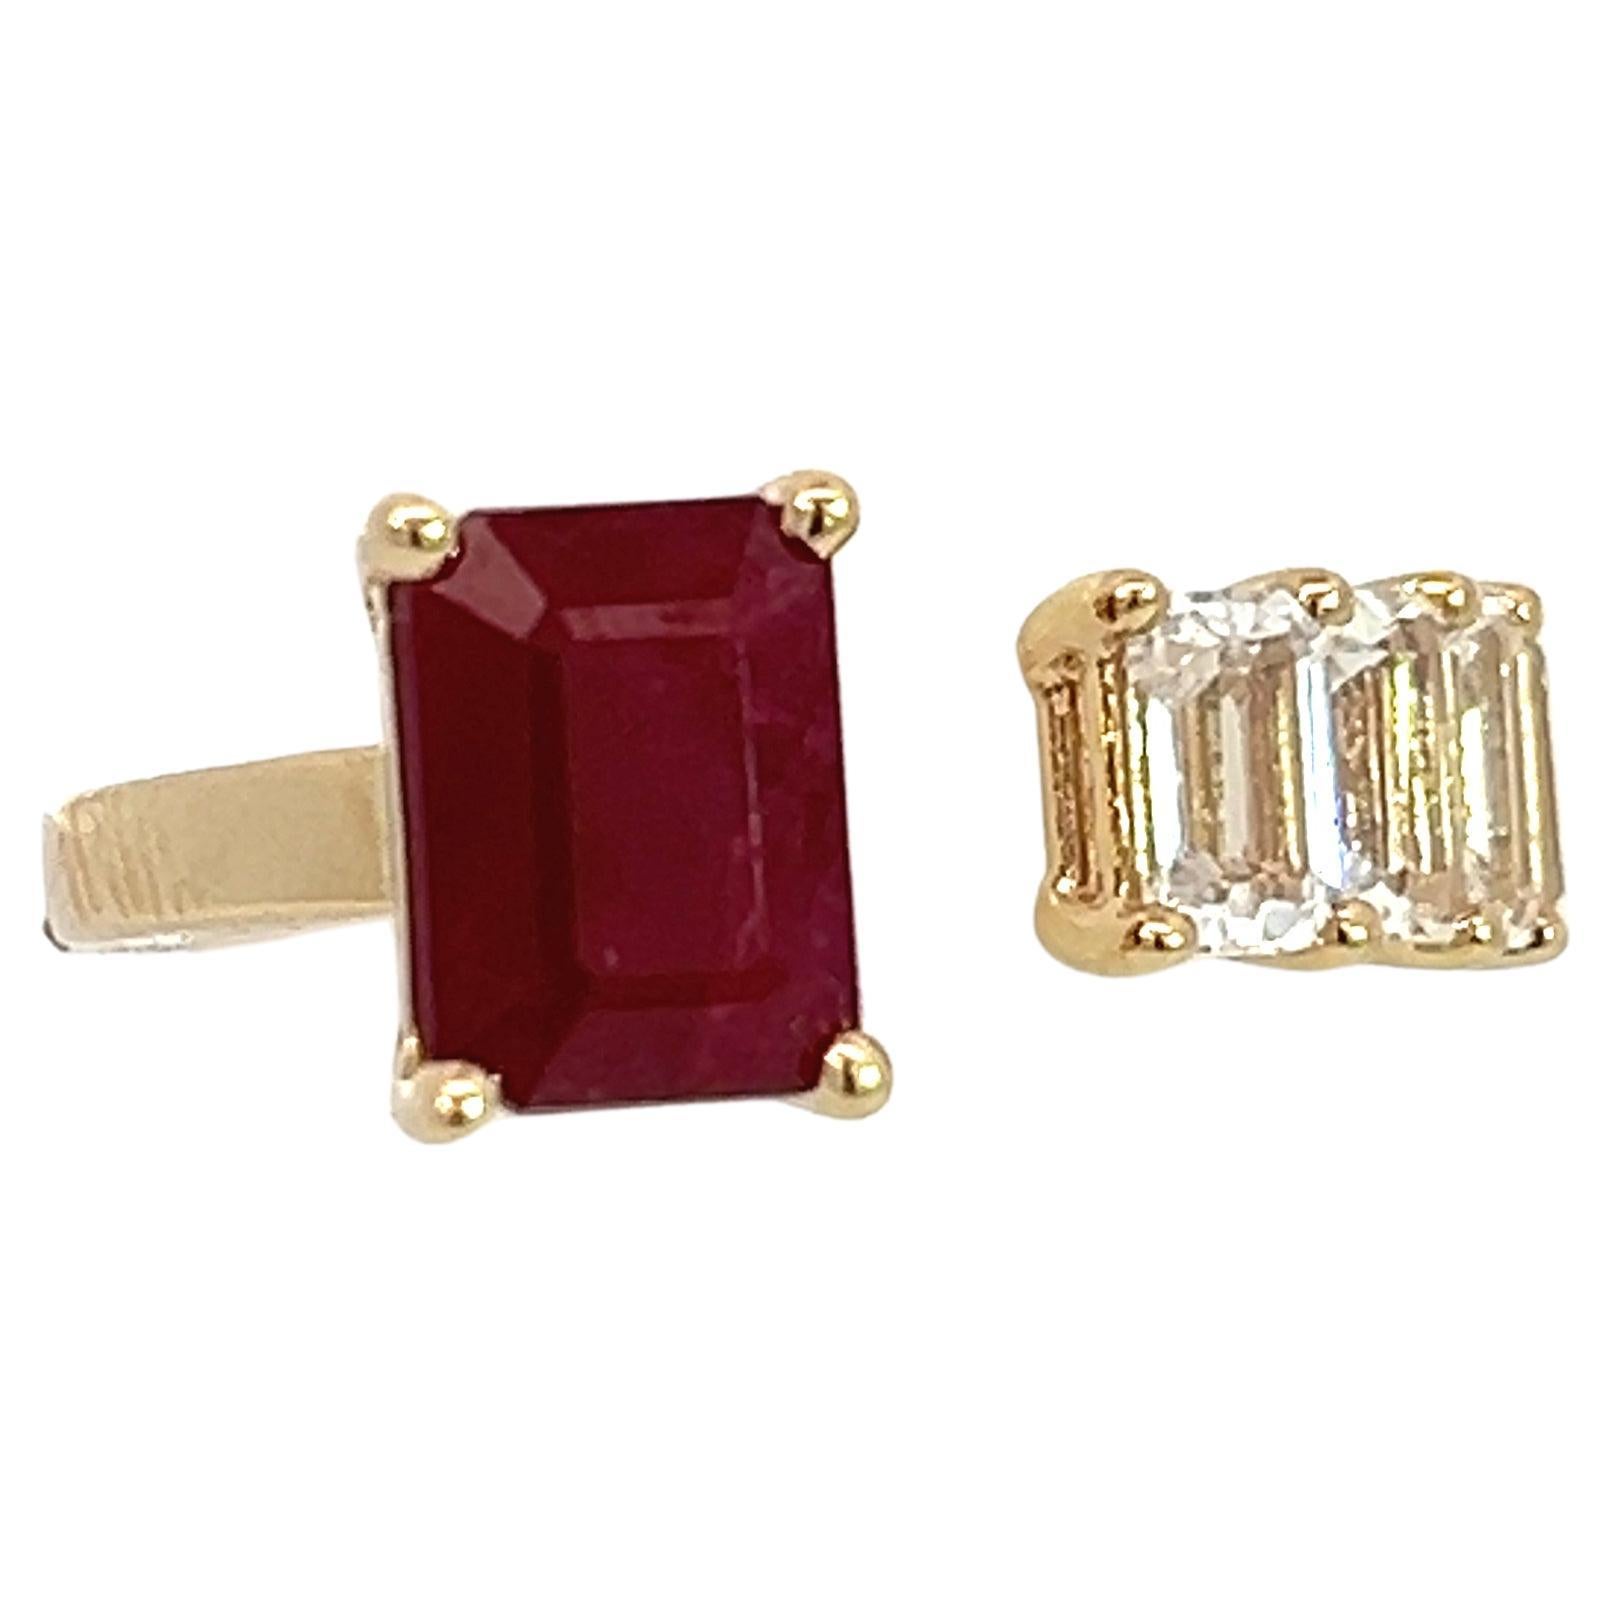 Natural Ruby Sapphire Ring 6.5 14k W Gold 3.64 TCW Certified